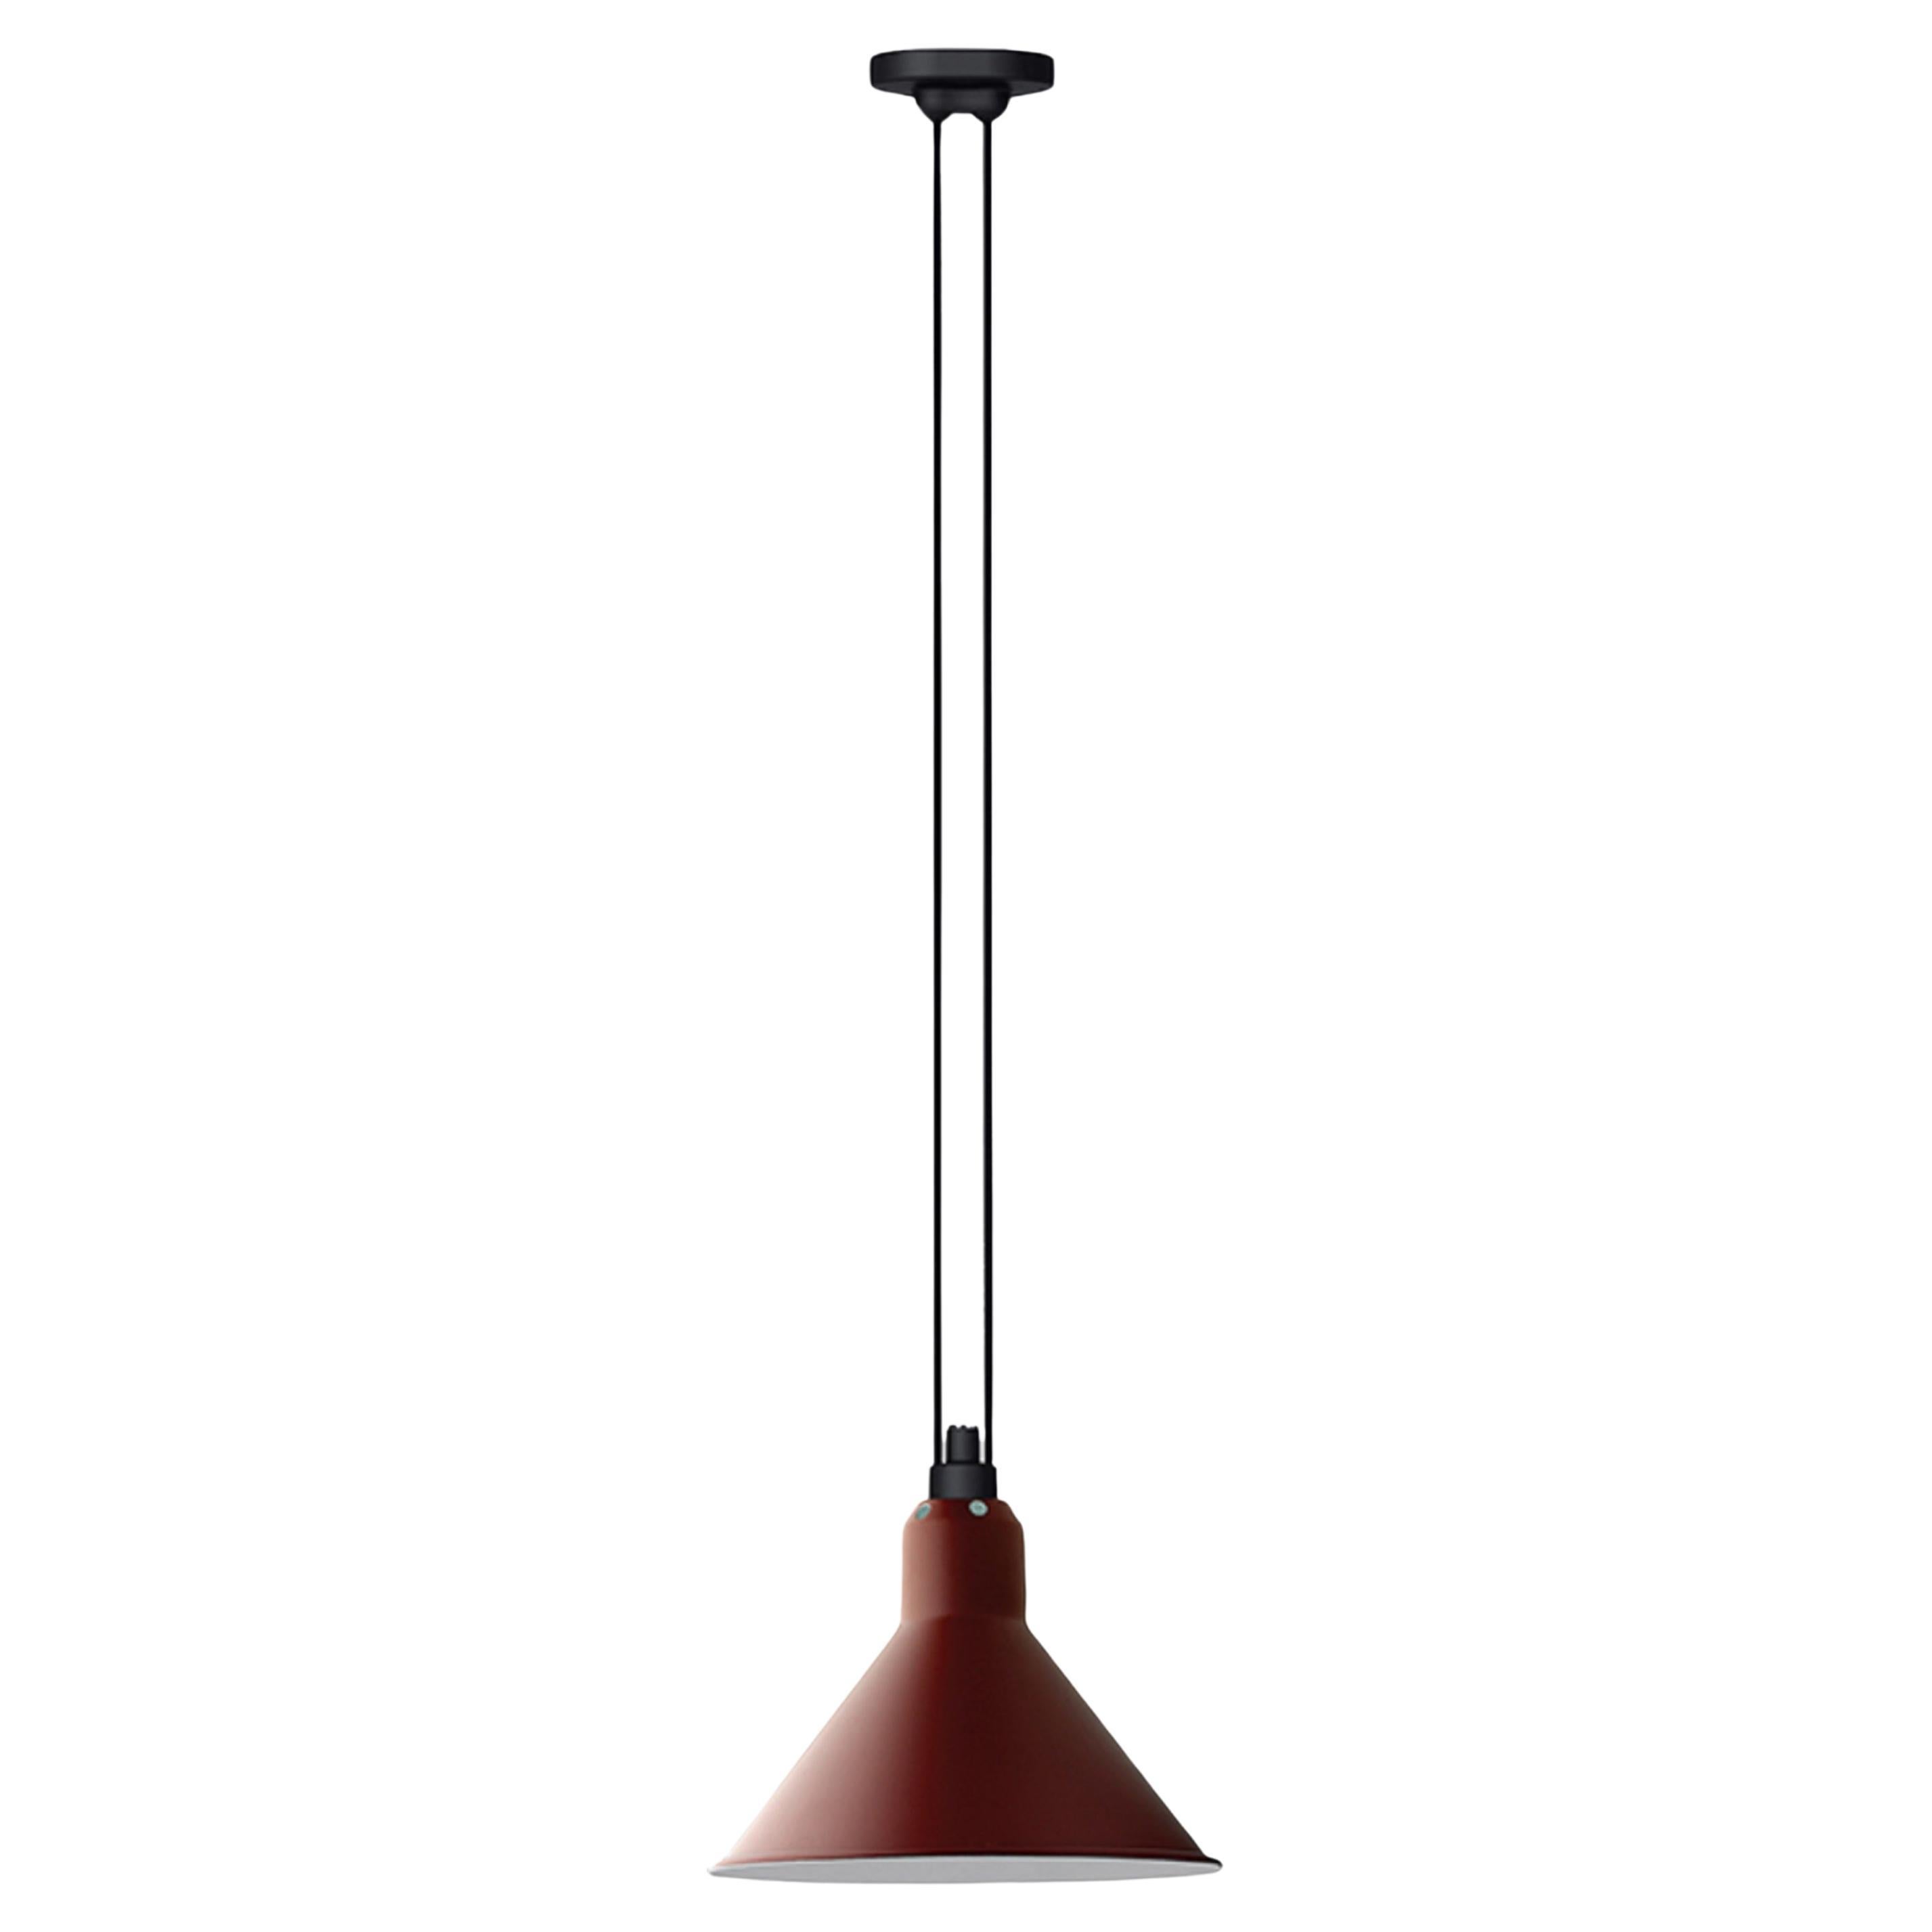 DCW Editions Les Acrobates N°322 Large Conic Pendant Lamp in Red Shade For Sale